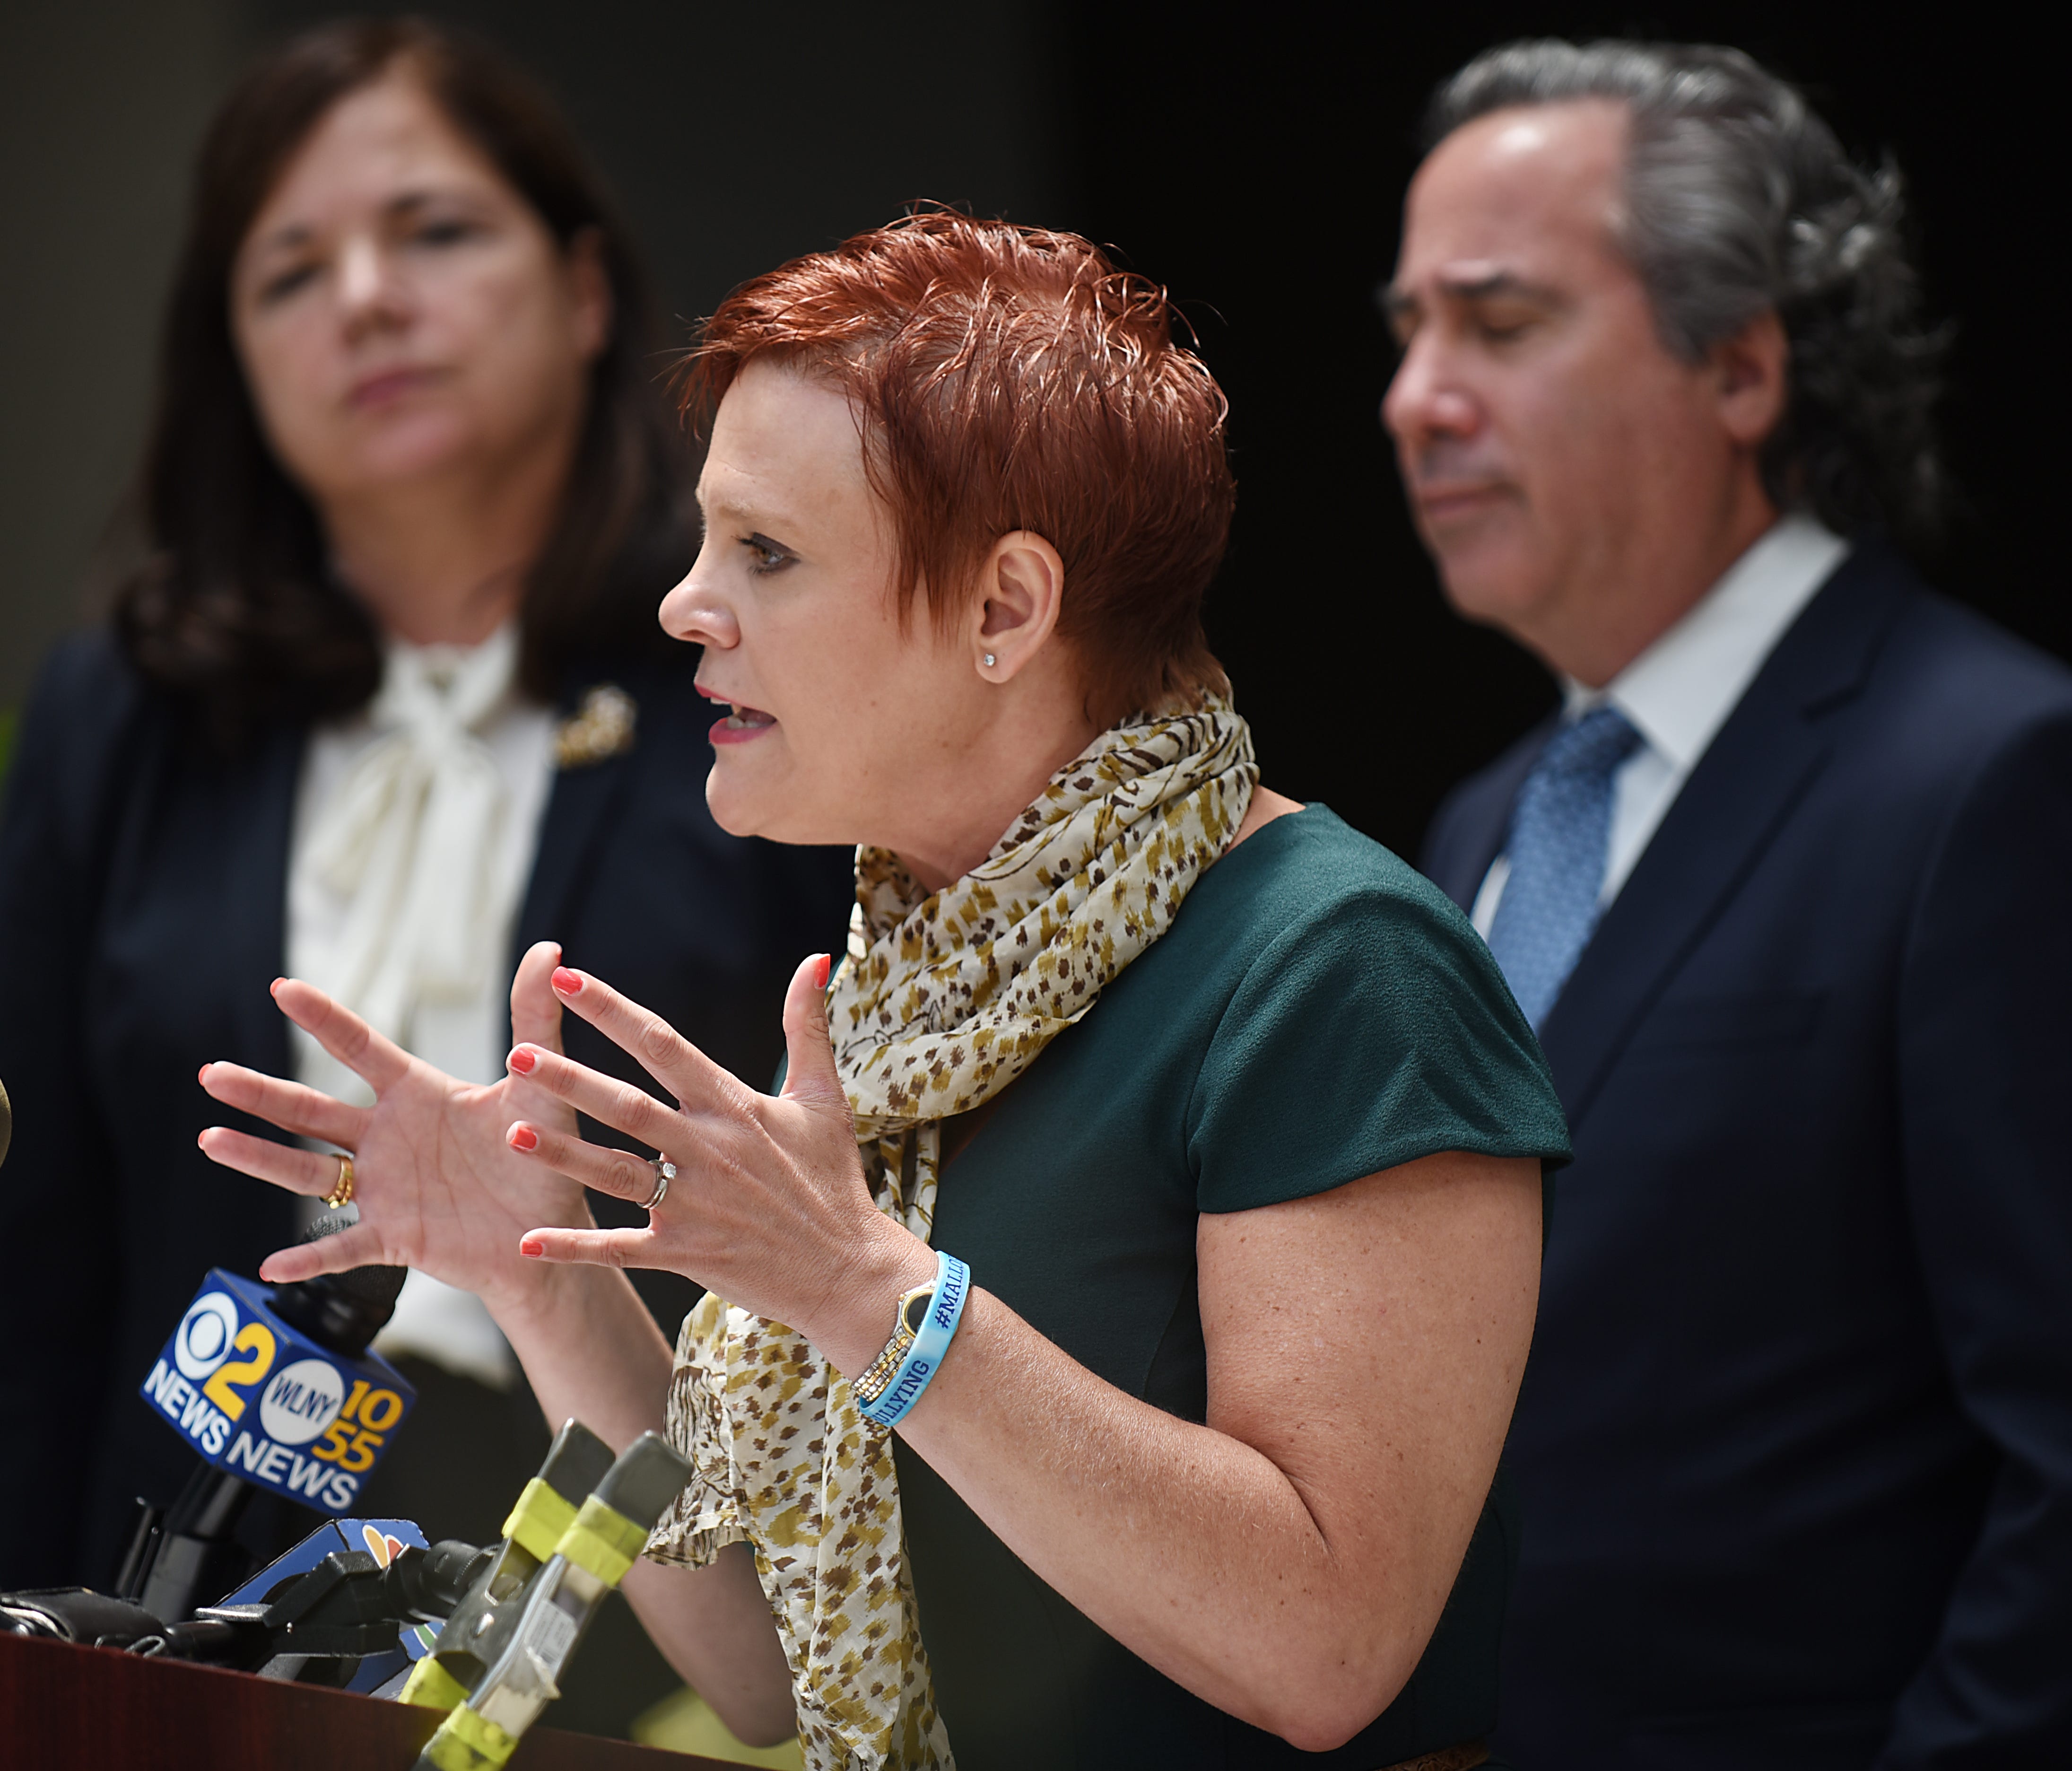 The Grossman family files lawsuit after their daughter Mallory commited suicide. Shown during a press conference at Nagel Rice Law Offices in Roseland, NJ in Tuesday June 19, 2018. (From left) Diane H. Sammons, Diane Grossman and Bruce H. Nagel.